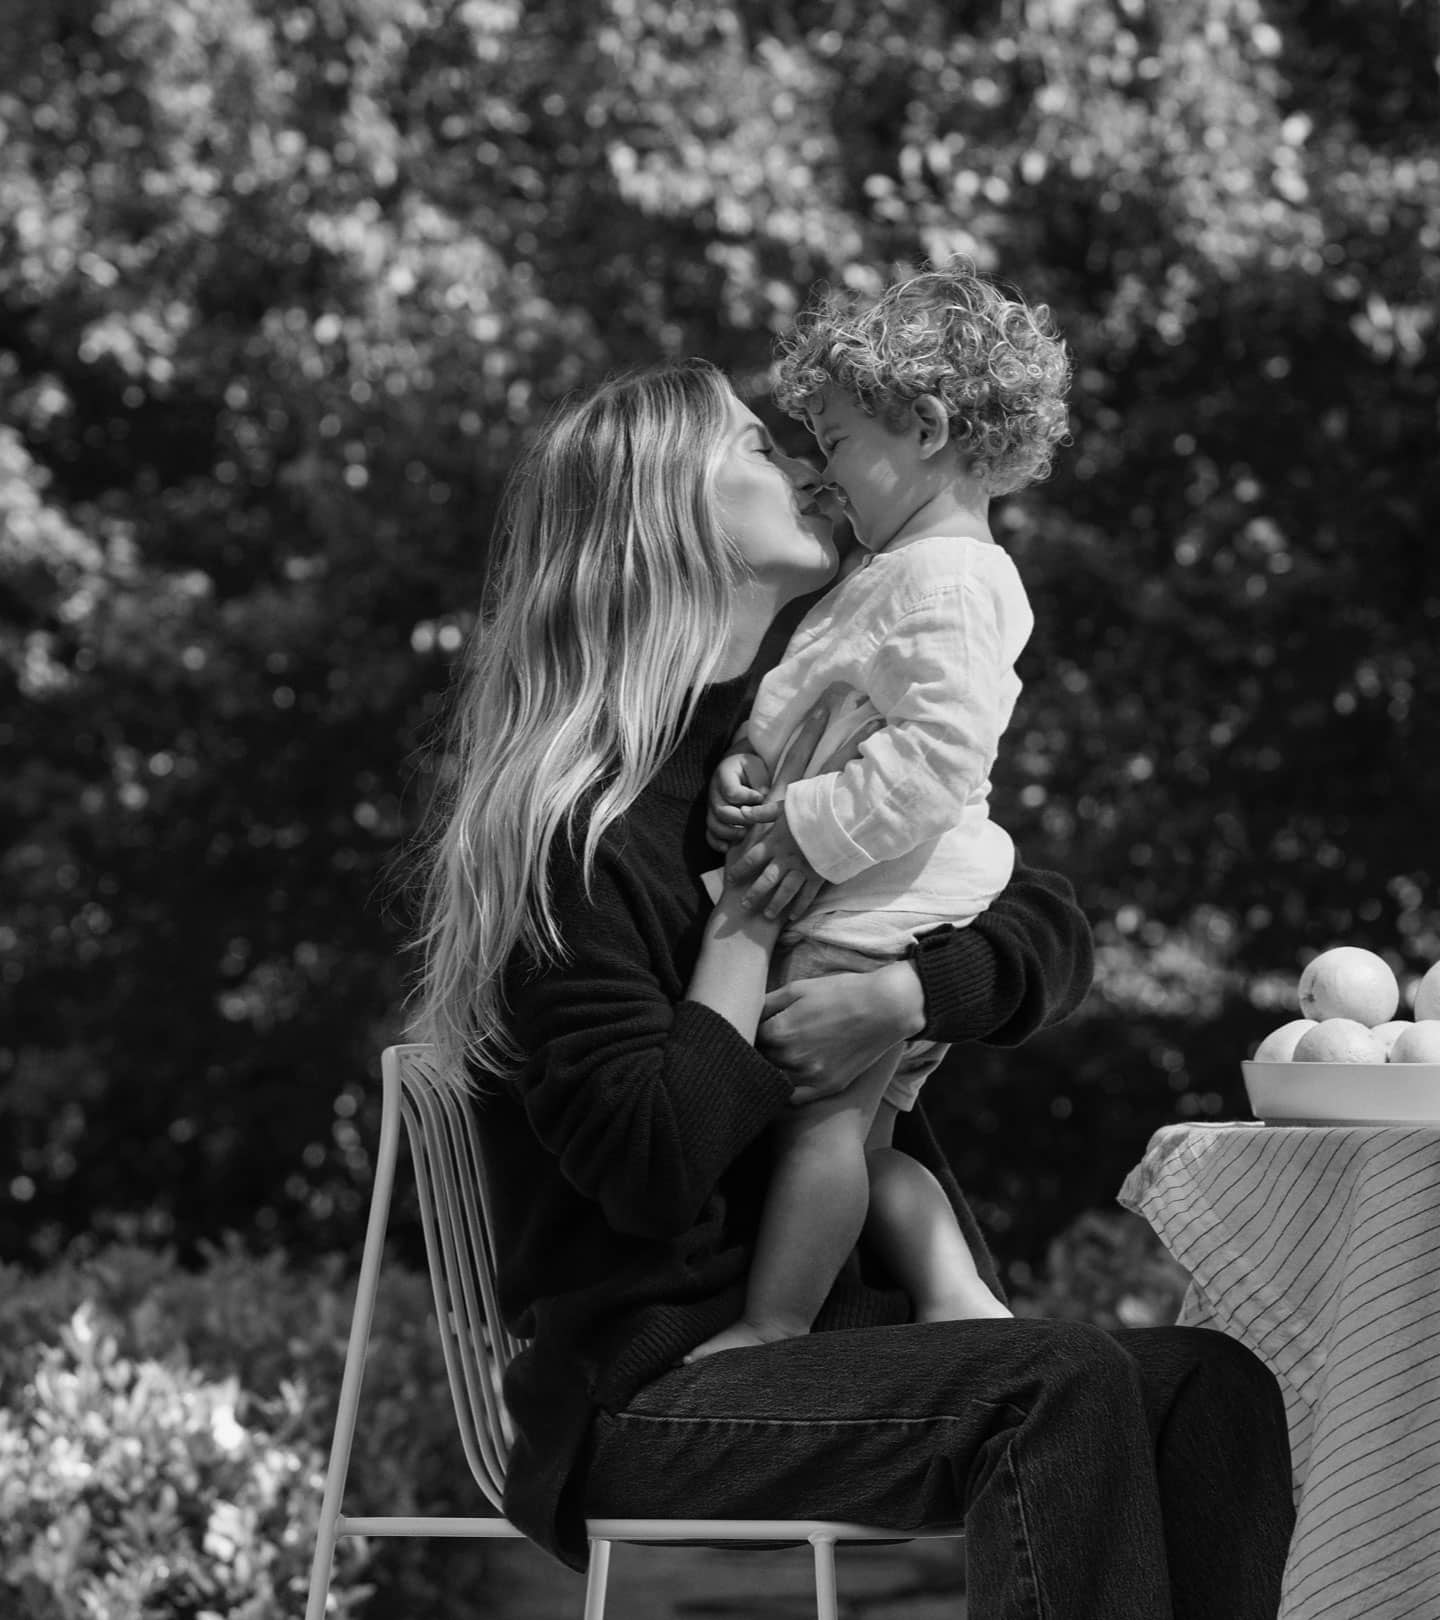 A mother and her toddler, sitting on a chair in a garden, next to a table. The toddler is standing on their mother's lap, and they are touching noses.